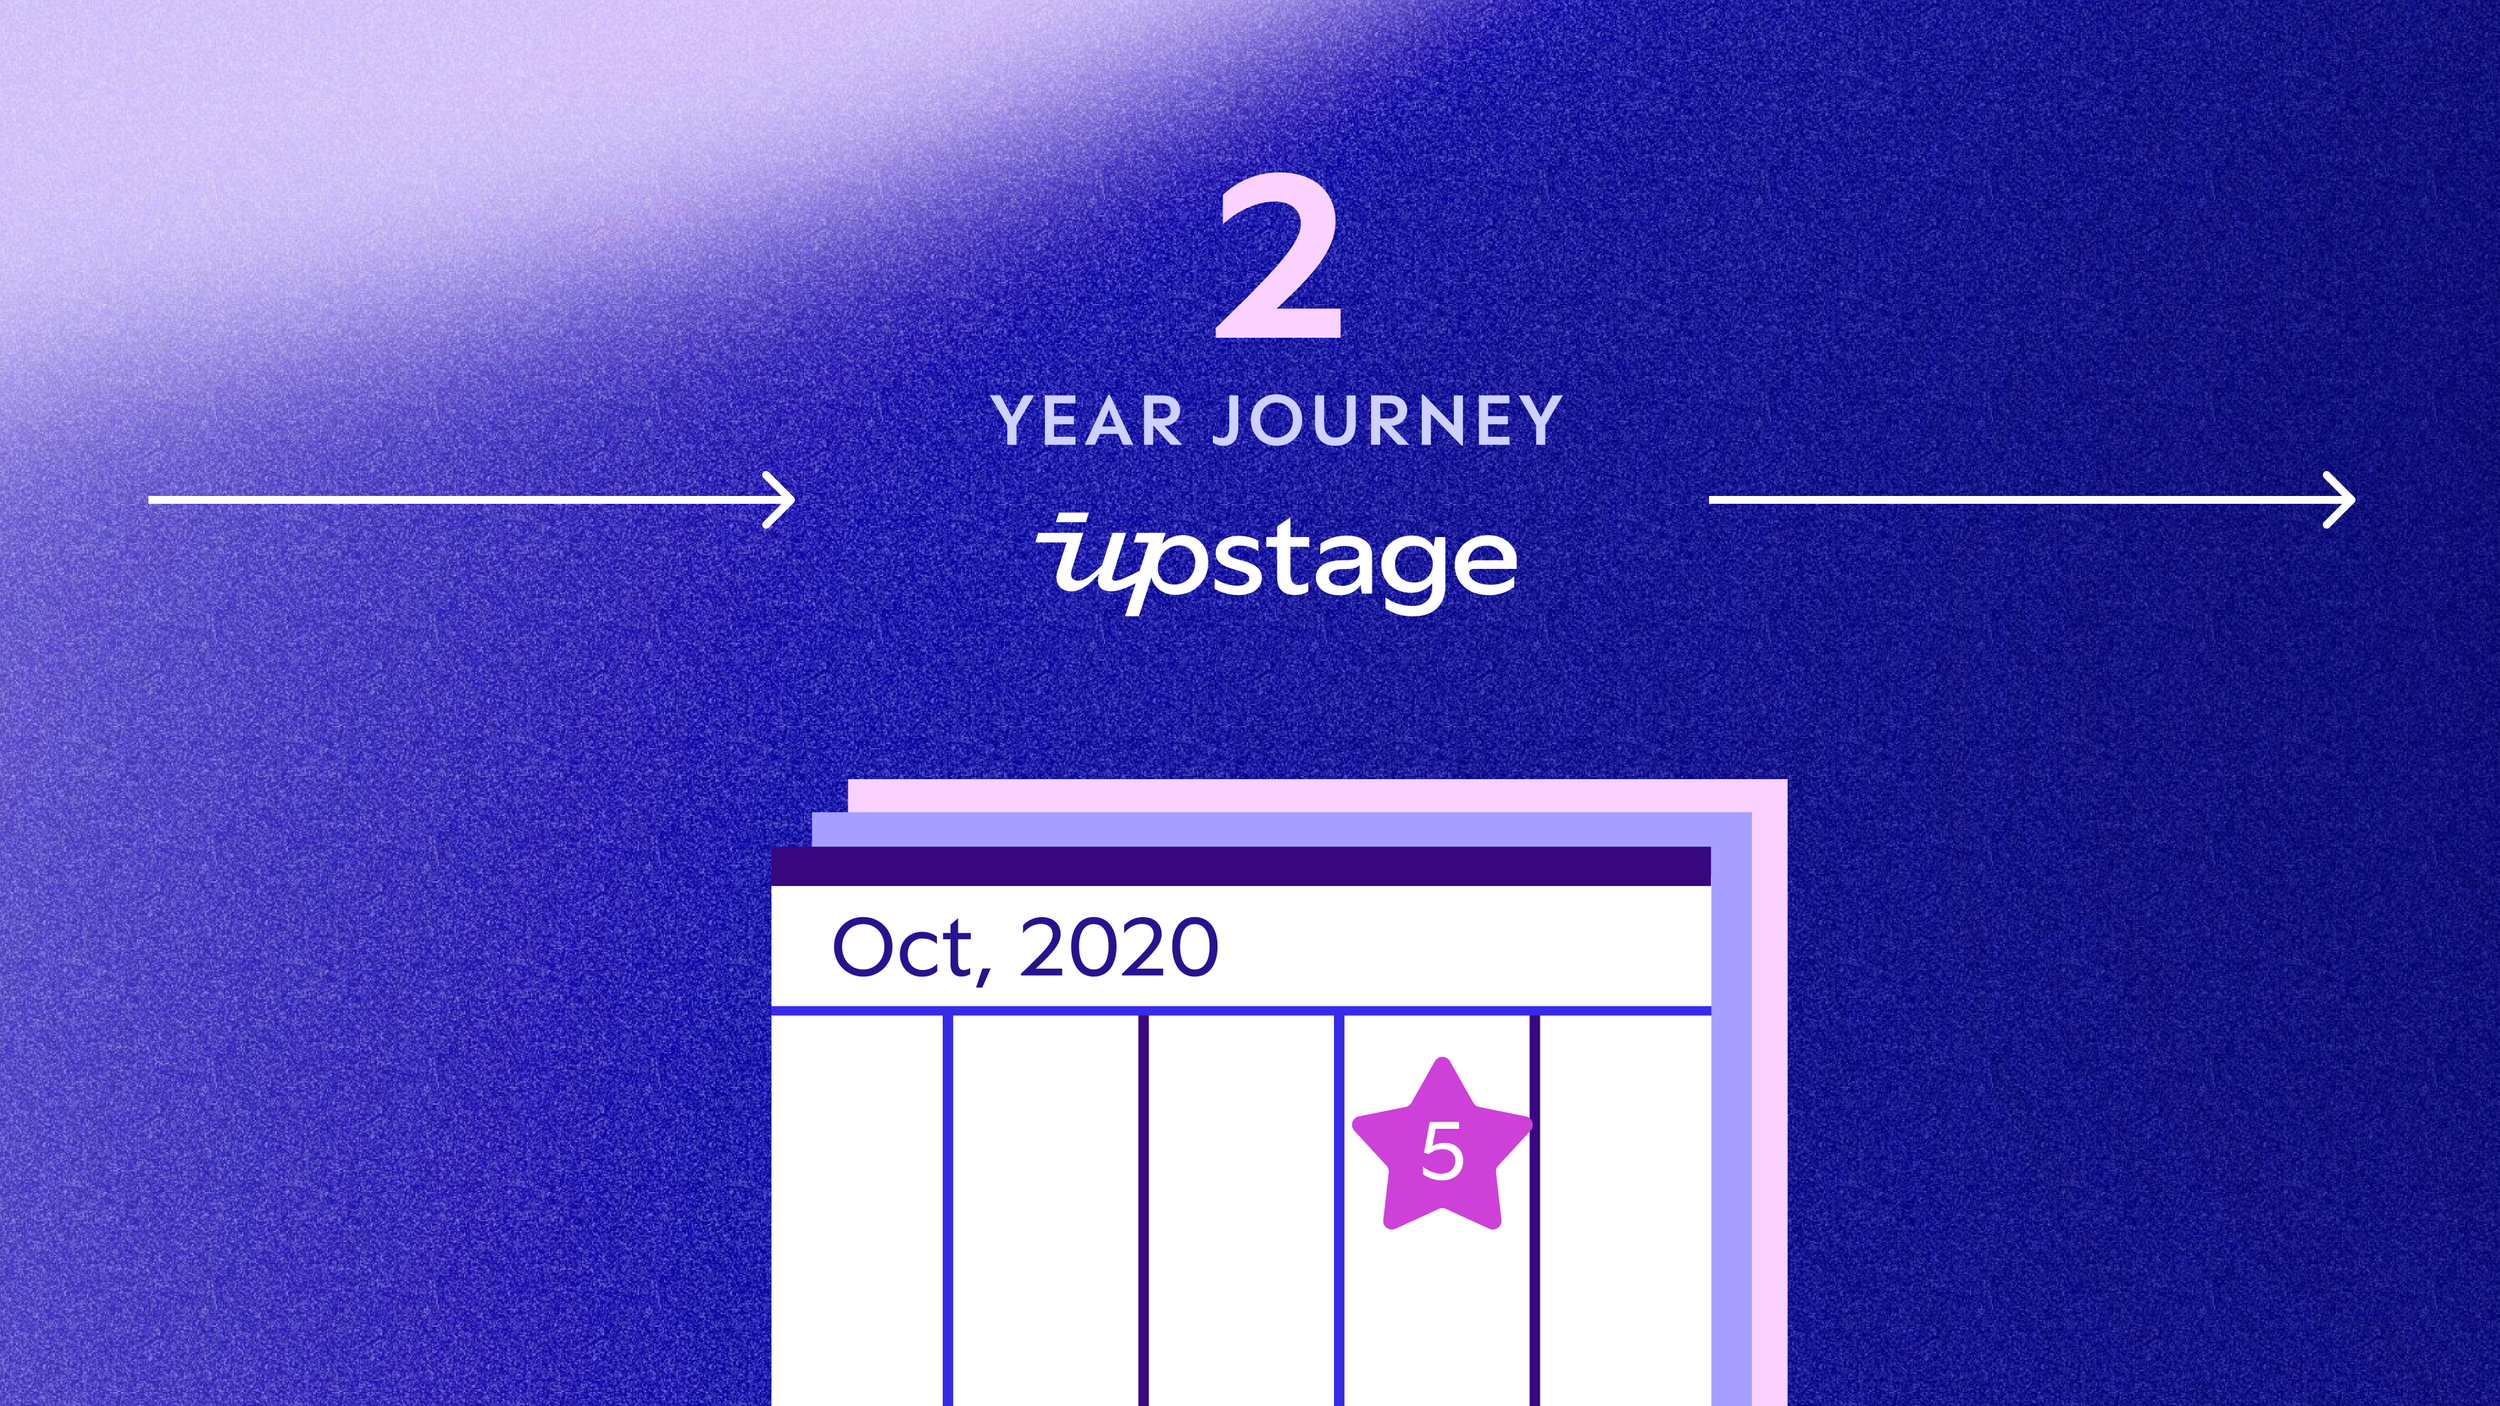 Upstage founding story